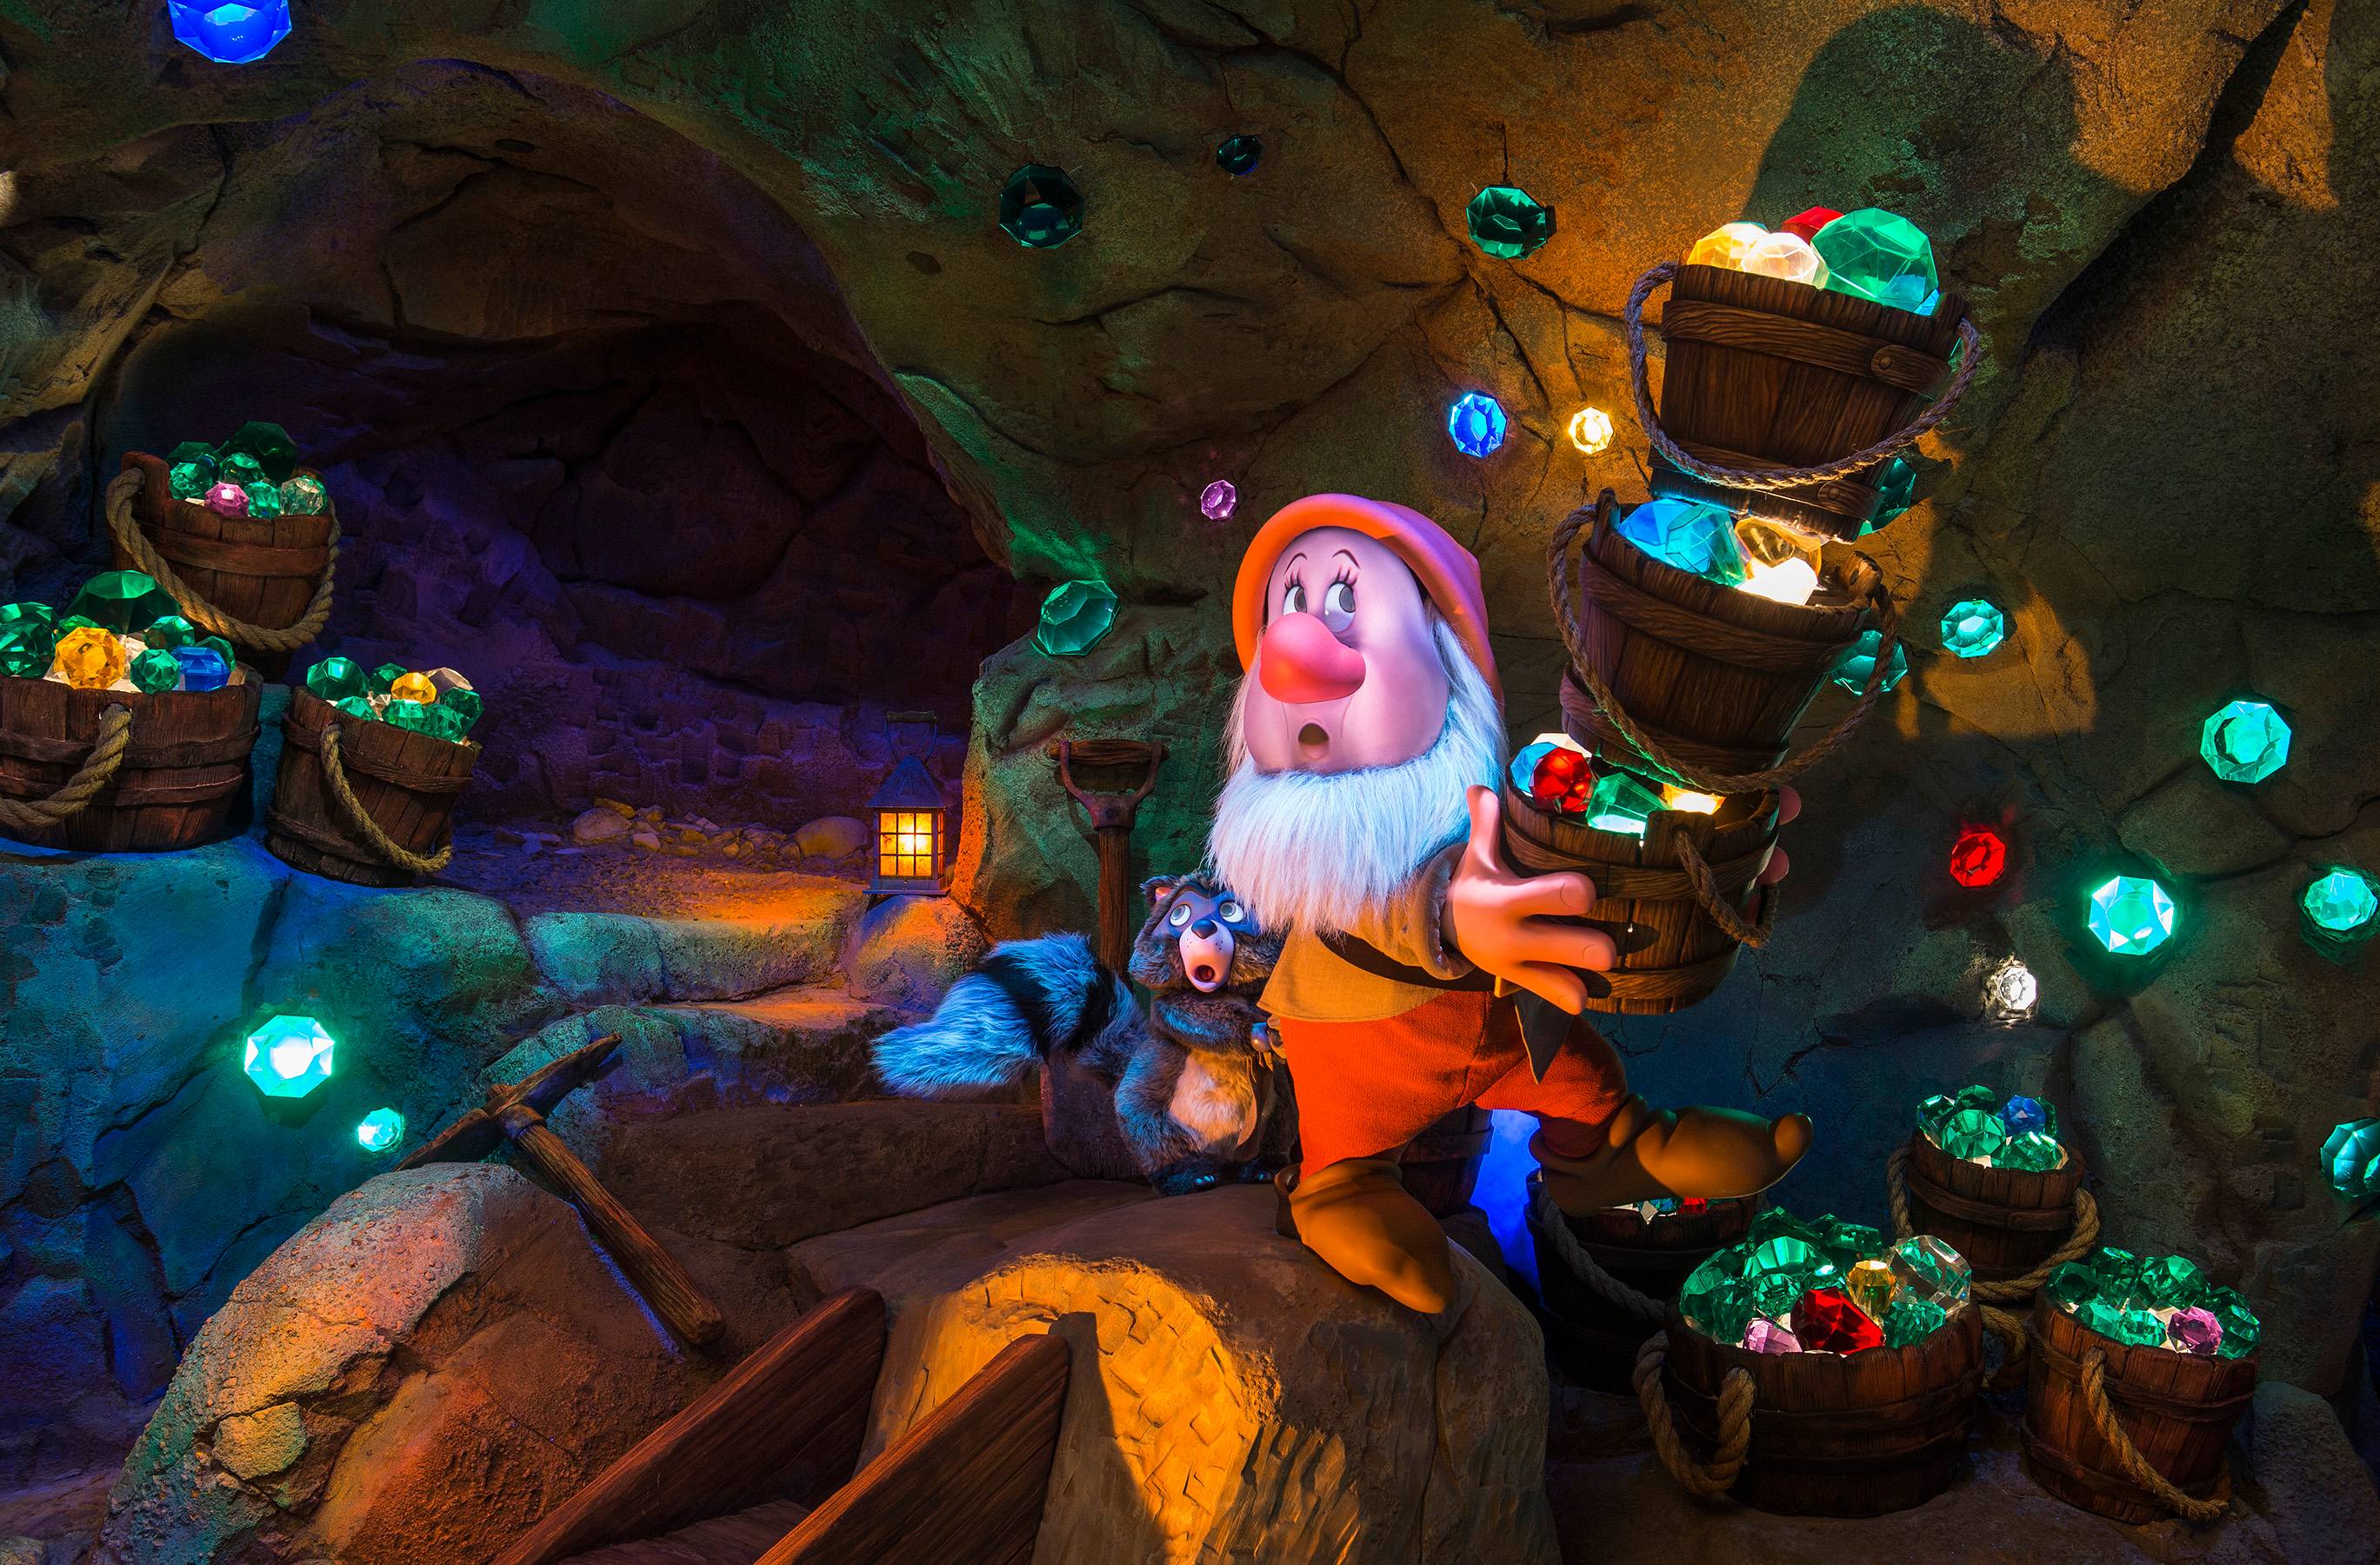 PHOTOS - Close-up look at the Seven Dwarfs Mine Train animatronics and show scenes